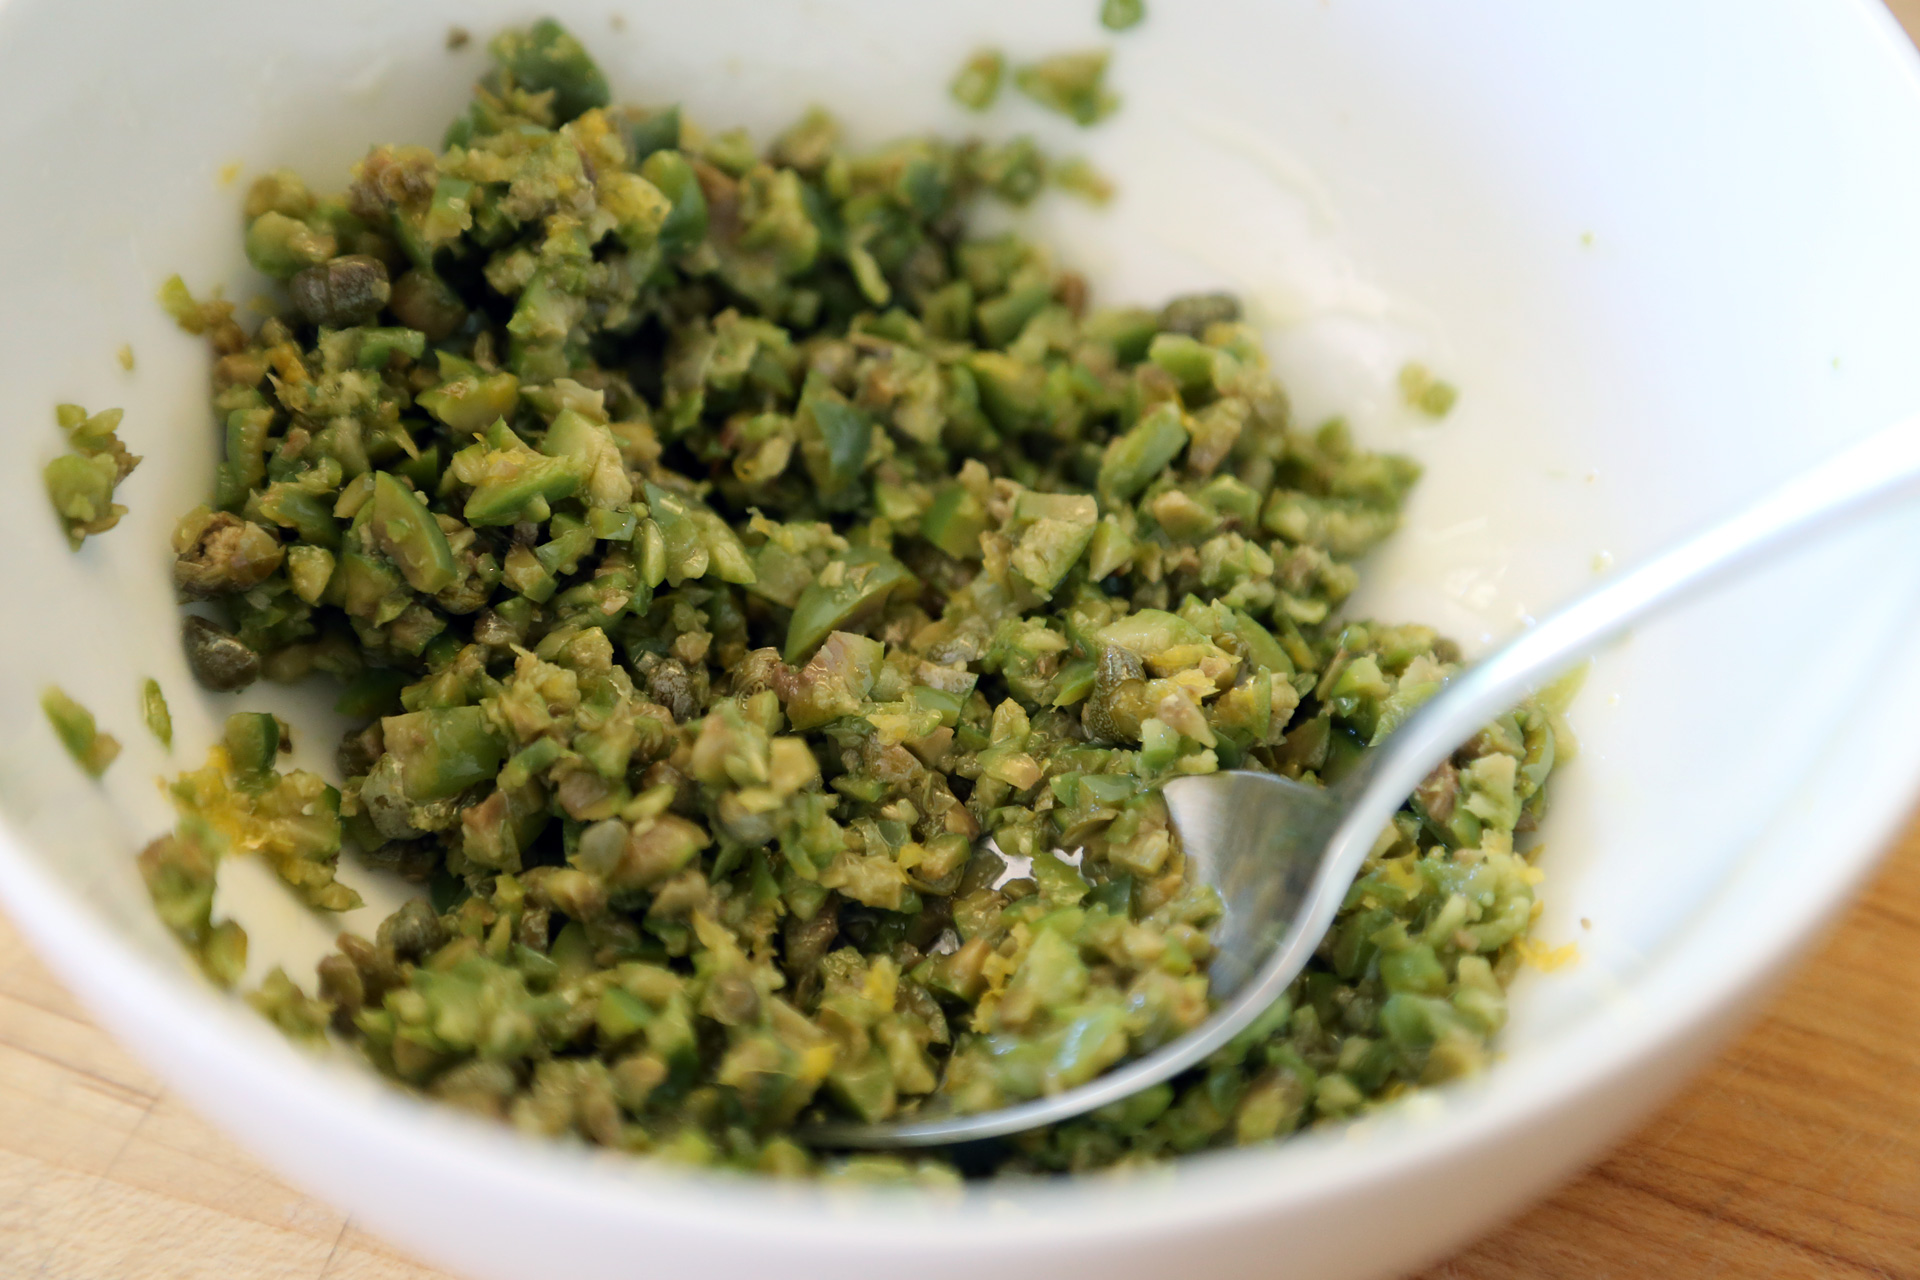 To make the relish, in a bowl, stir together the minced olives, lemon zest, capers, and olive oil. Set aside.